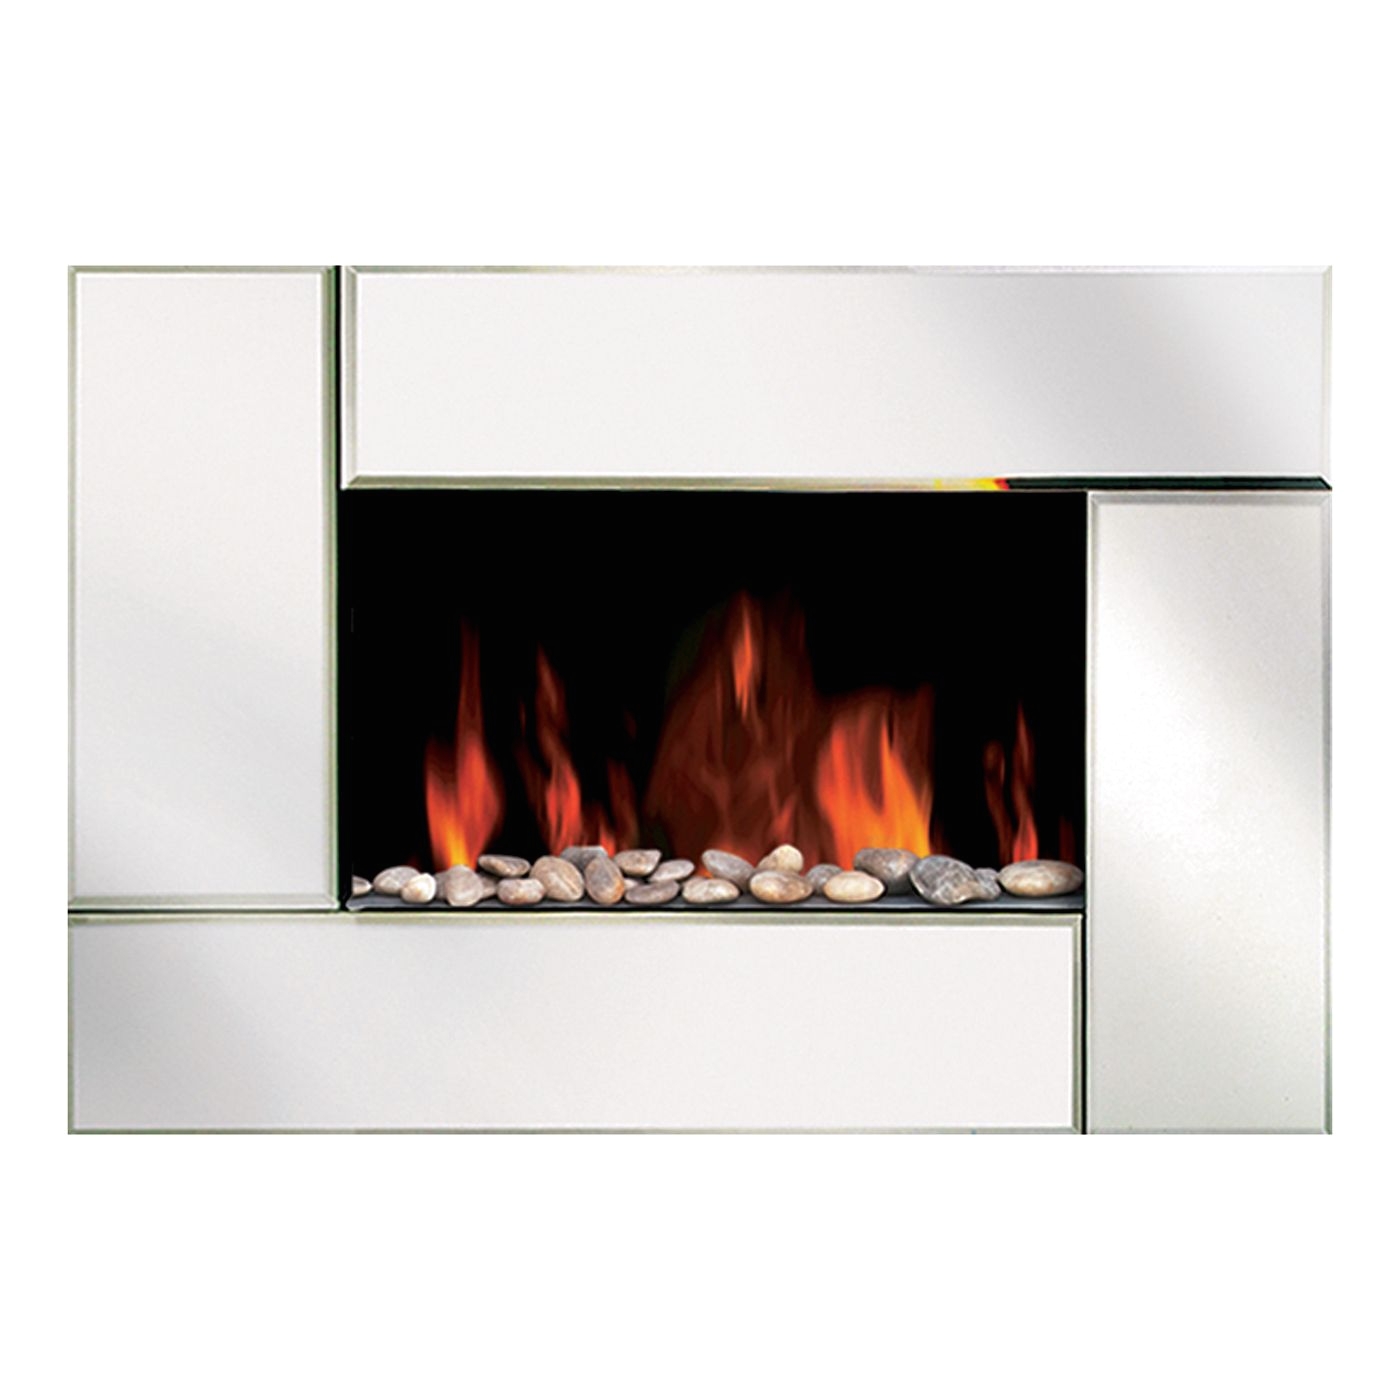 shop modern homes 67501 wall mount bevel edge mirror fireplace at lowe s canada find our selection of electric fireplaces at the lowest price guaranteed